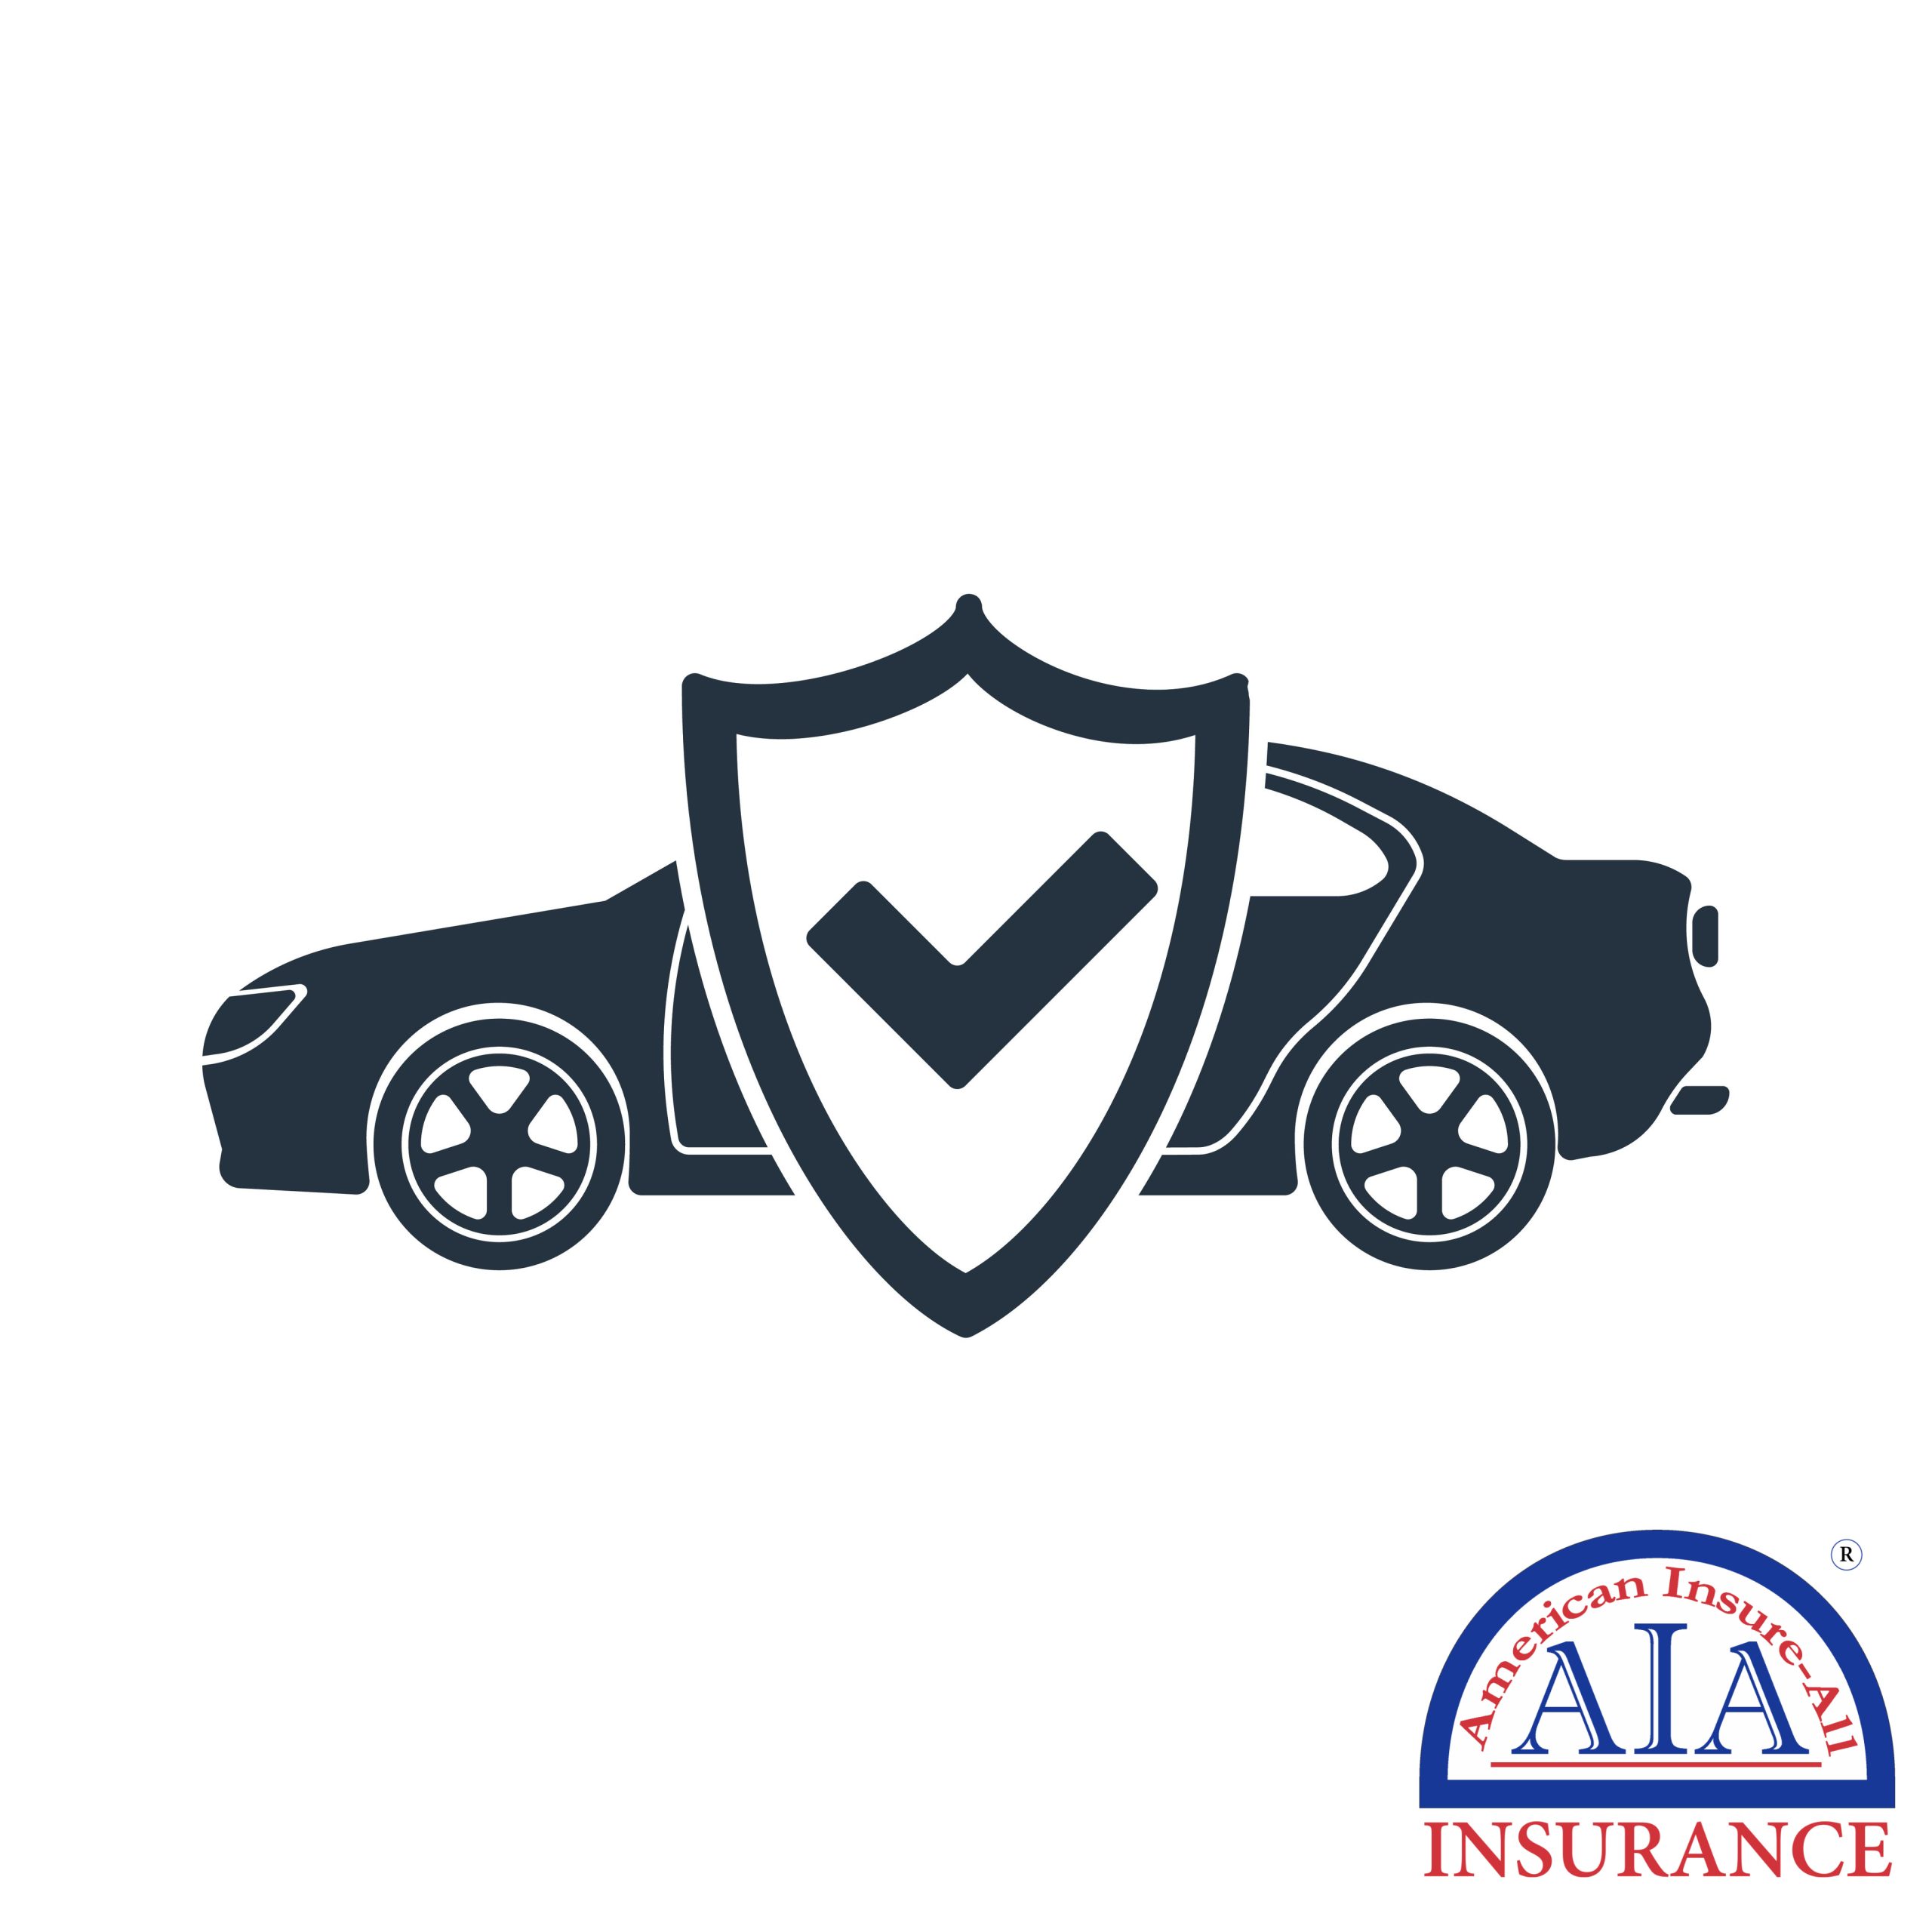 What Kind of Vehicle Insurance Would Most Effectively Meet Your Needs?